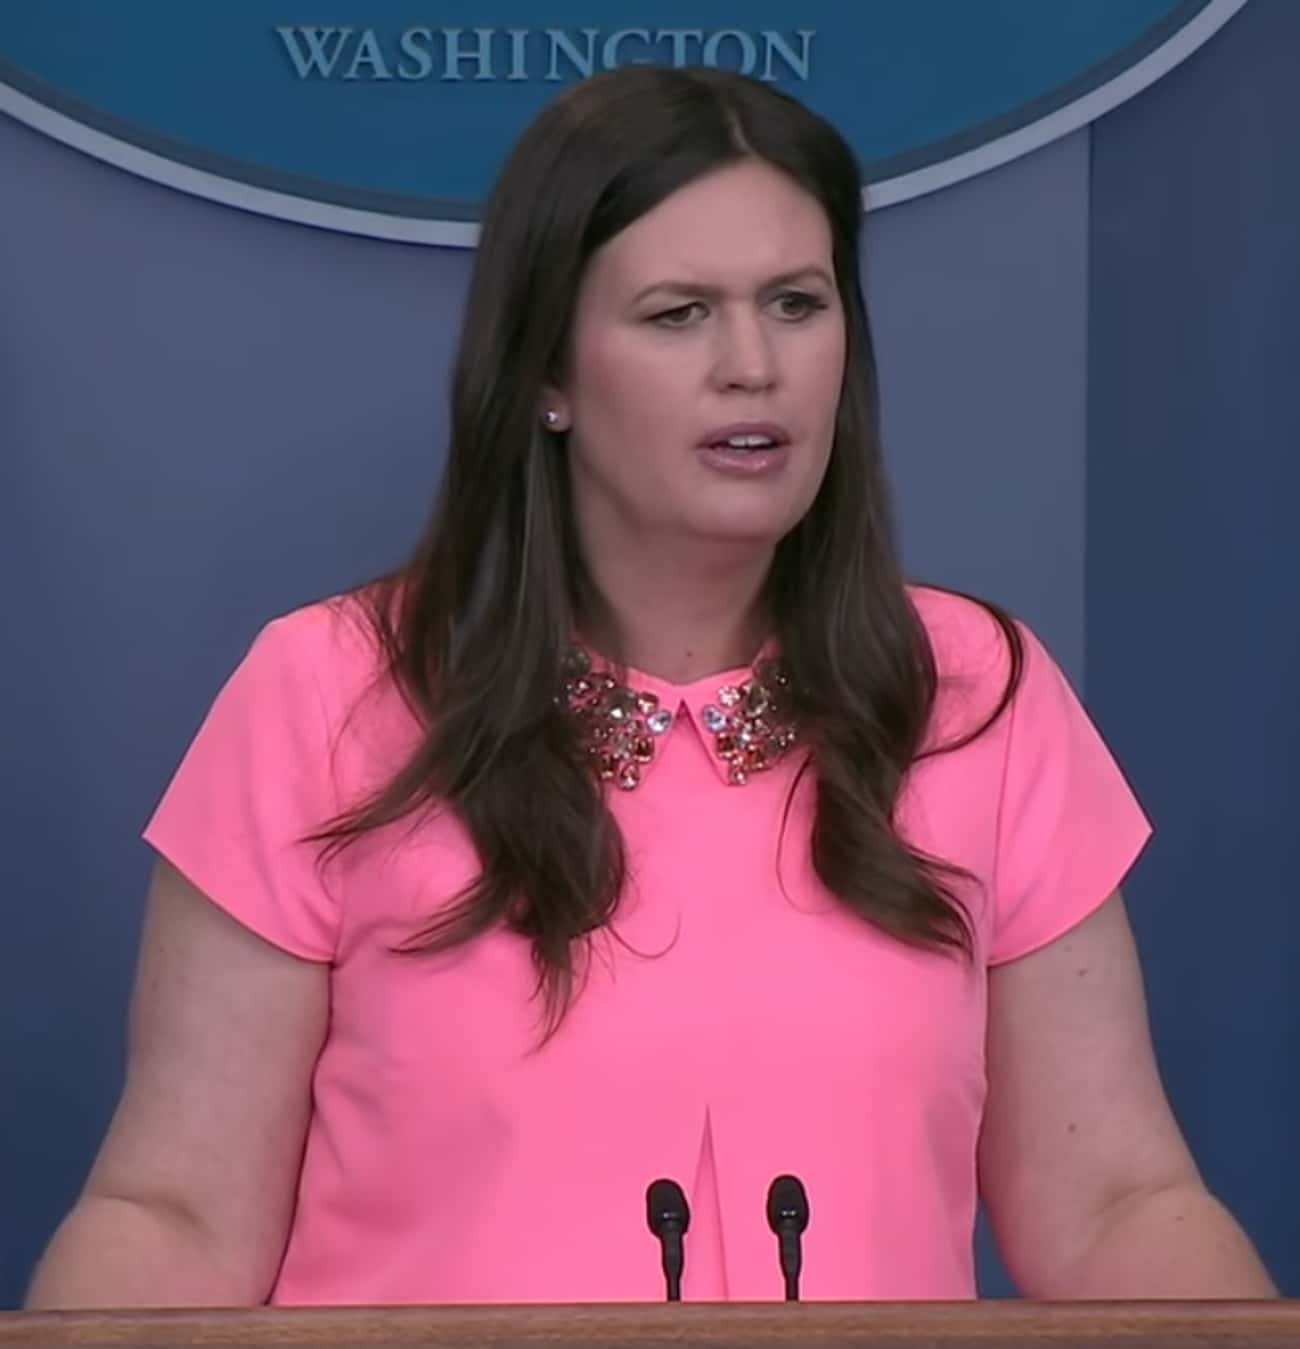 Katie Price Does The Hair And Makeup For White House Press Secretary Sarah Huckabee Sanders